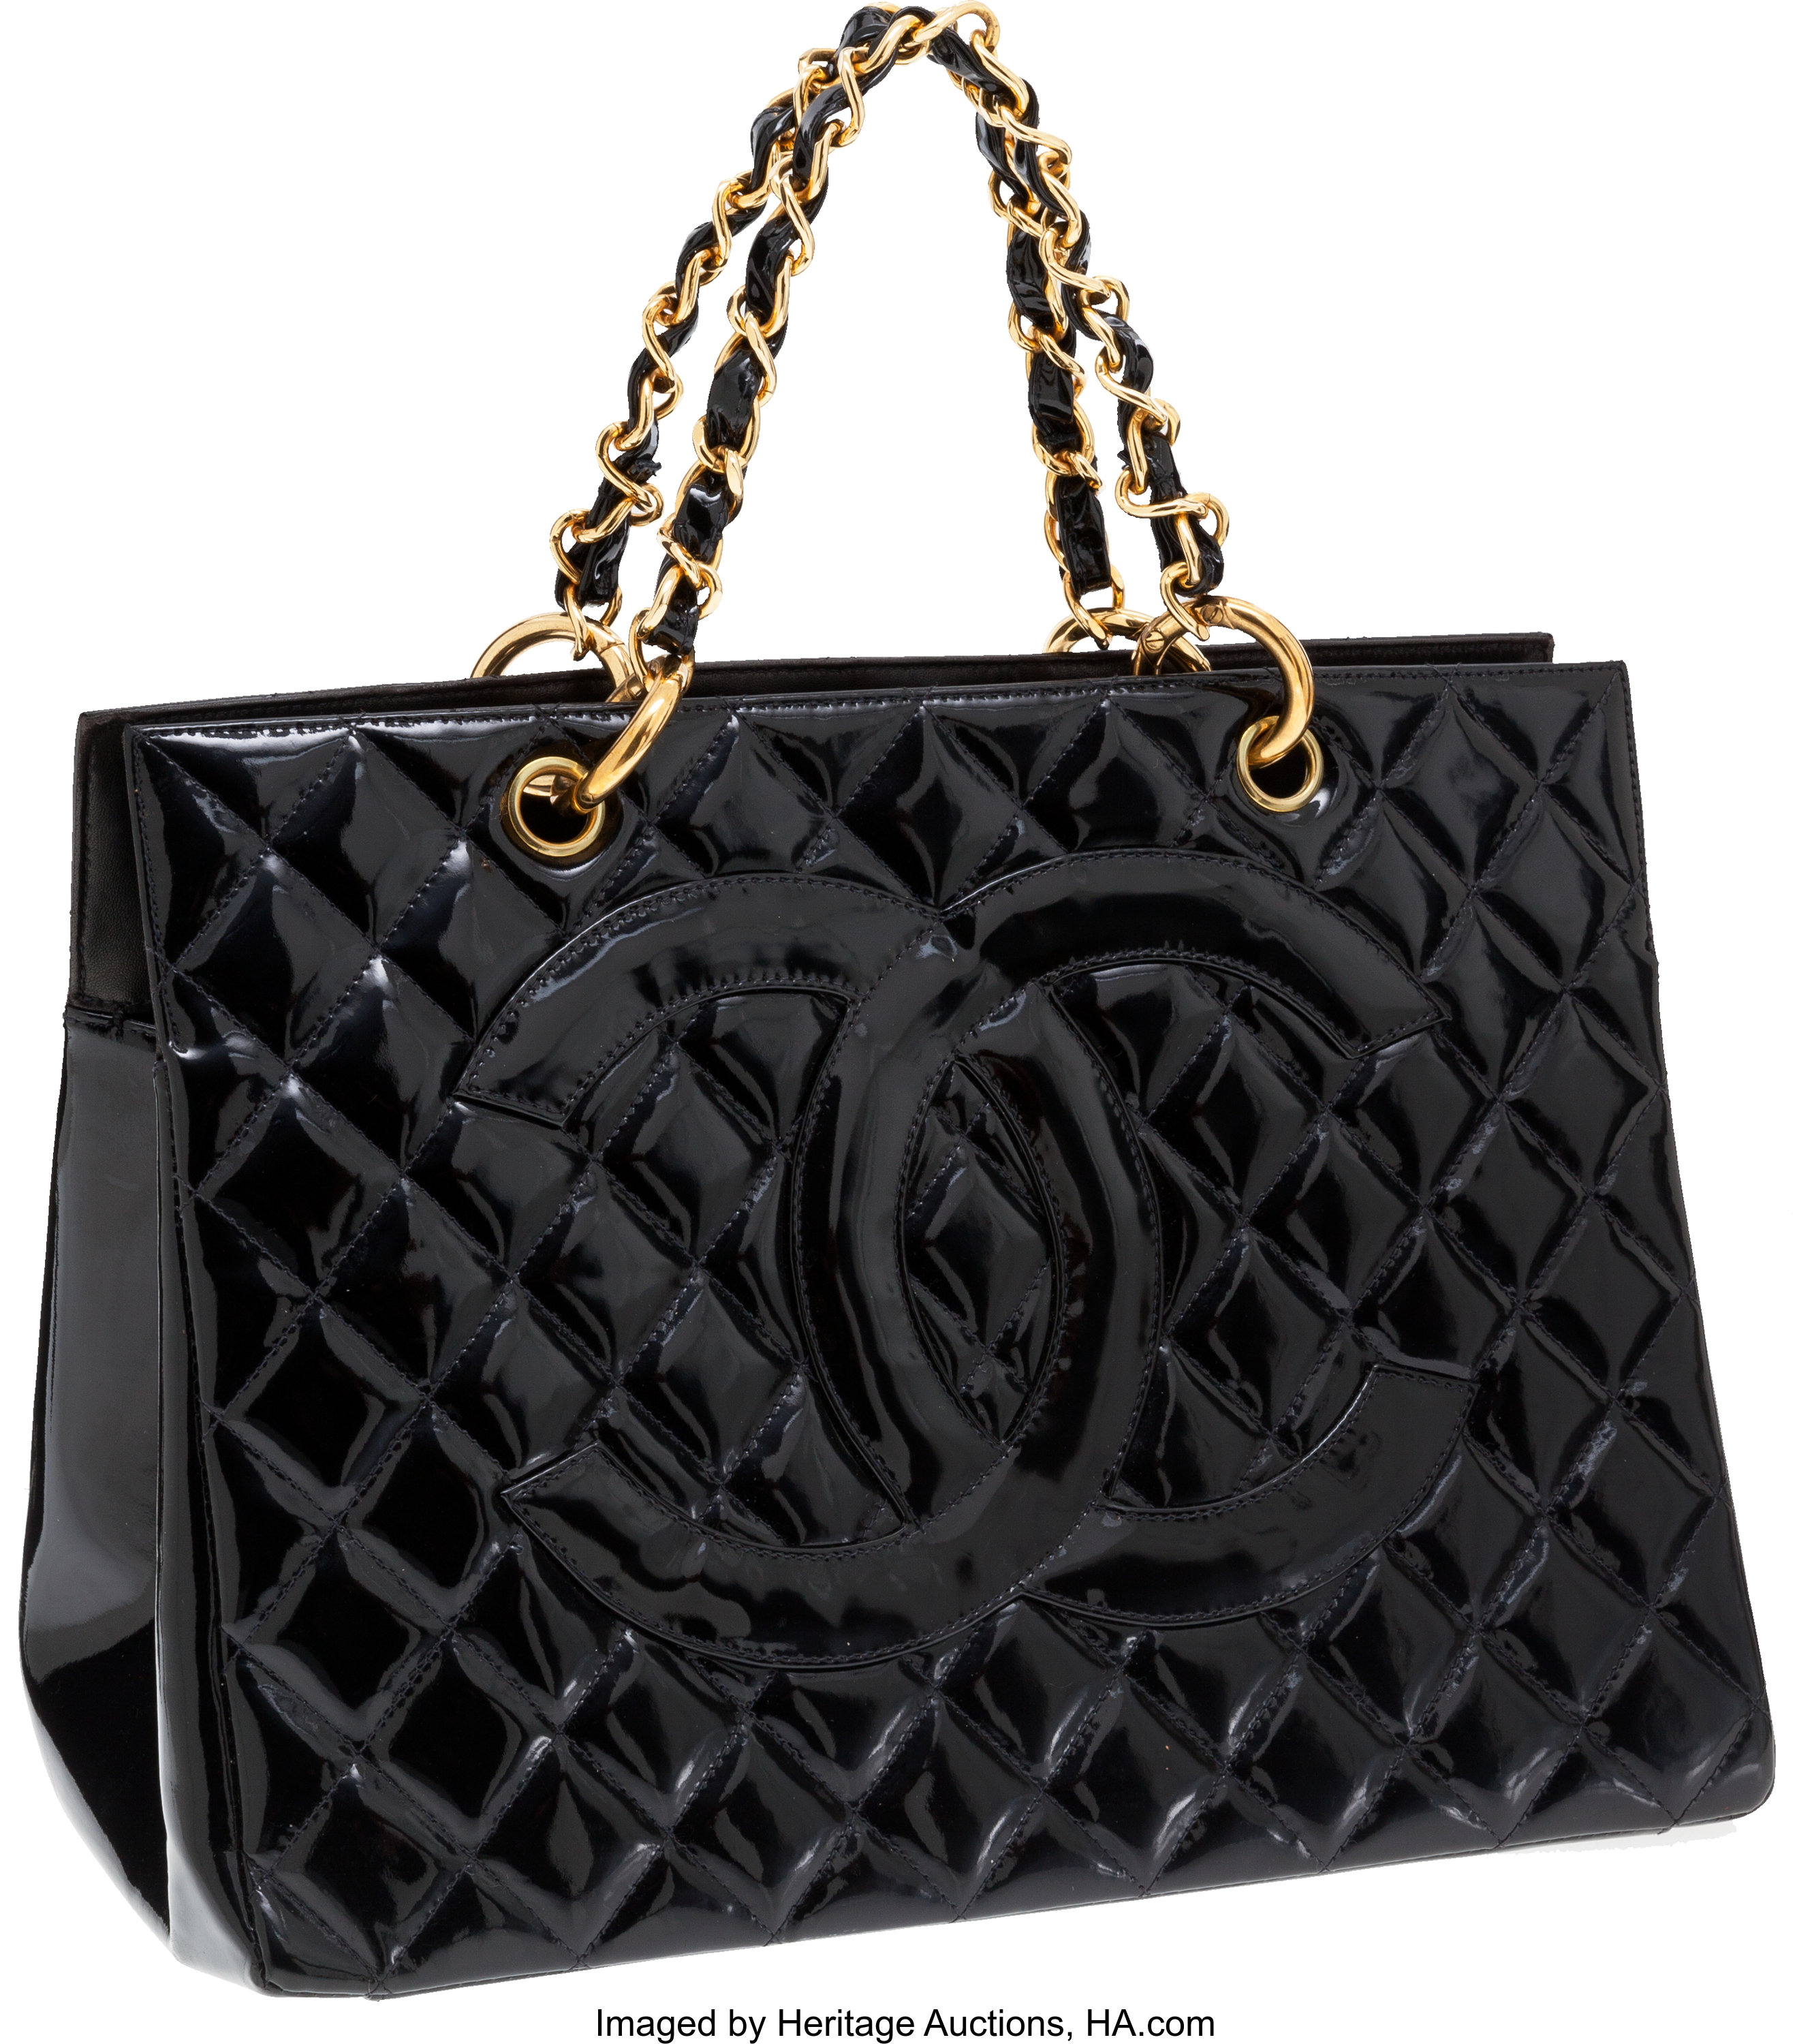 Chanel Black Quilted Patent Leather Large Tote Bag with Gold